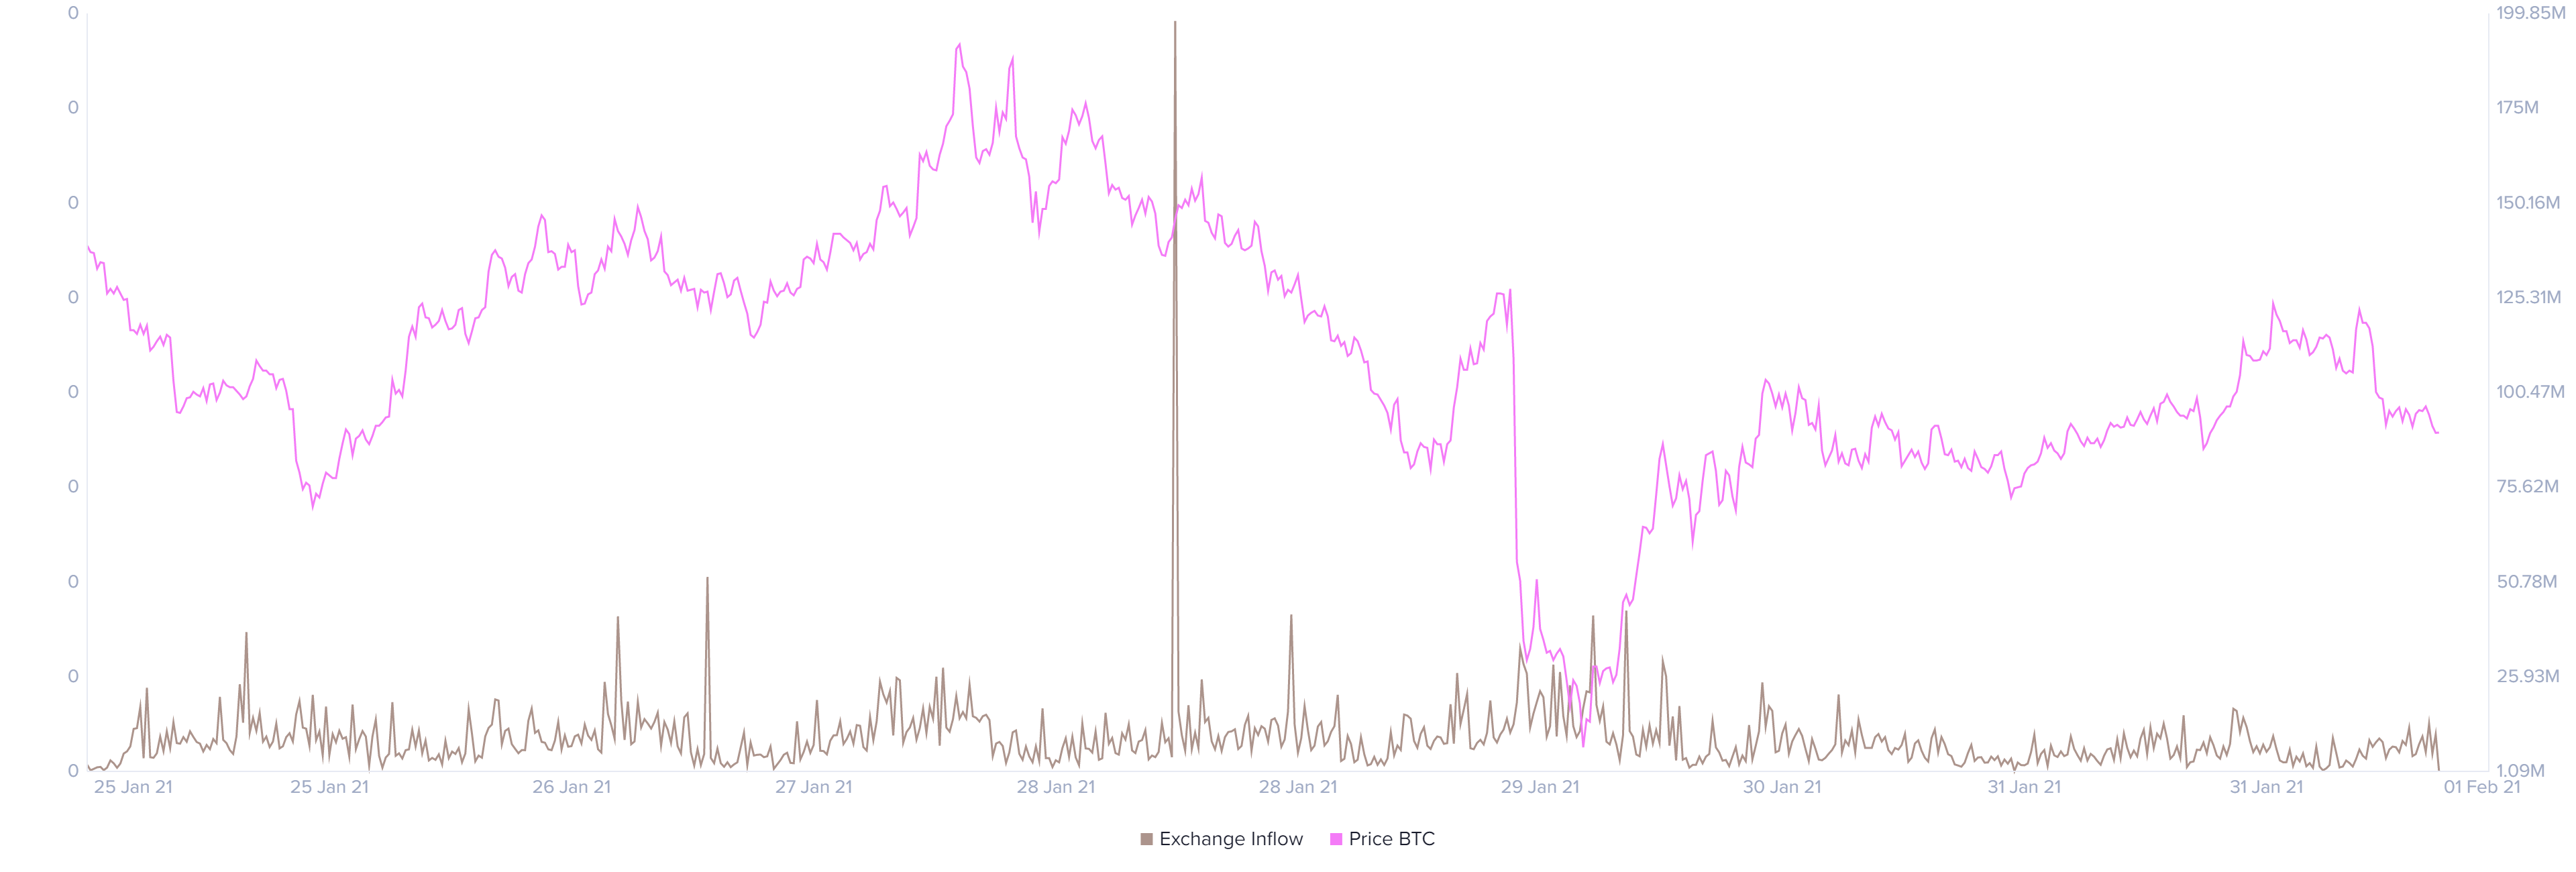 USDT exchange inflow plotted against Bitcoin price (green)